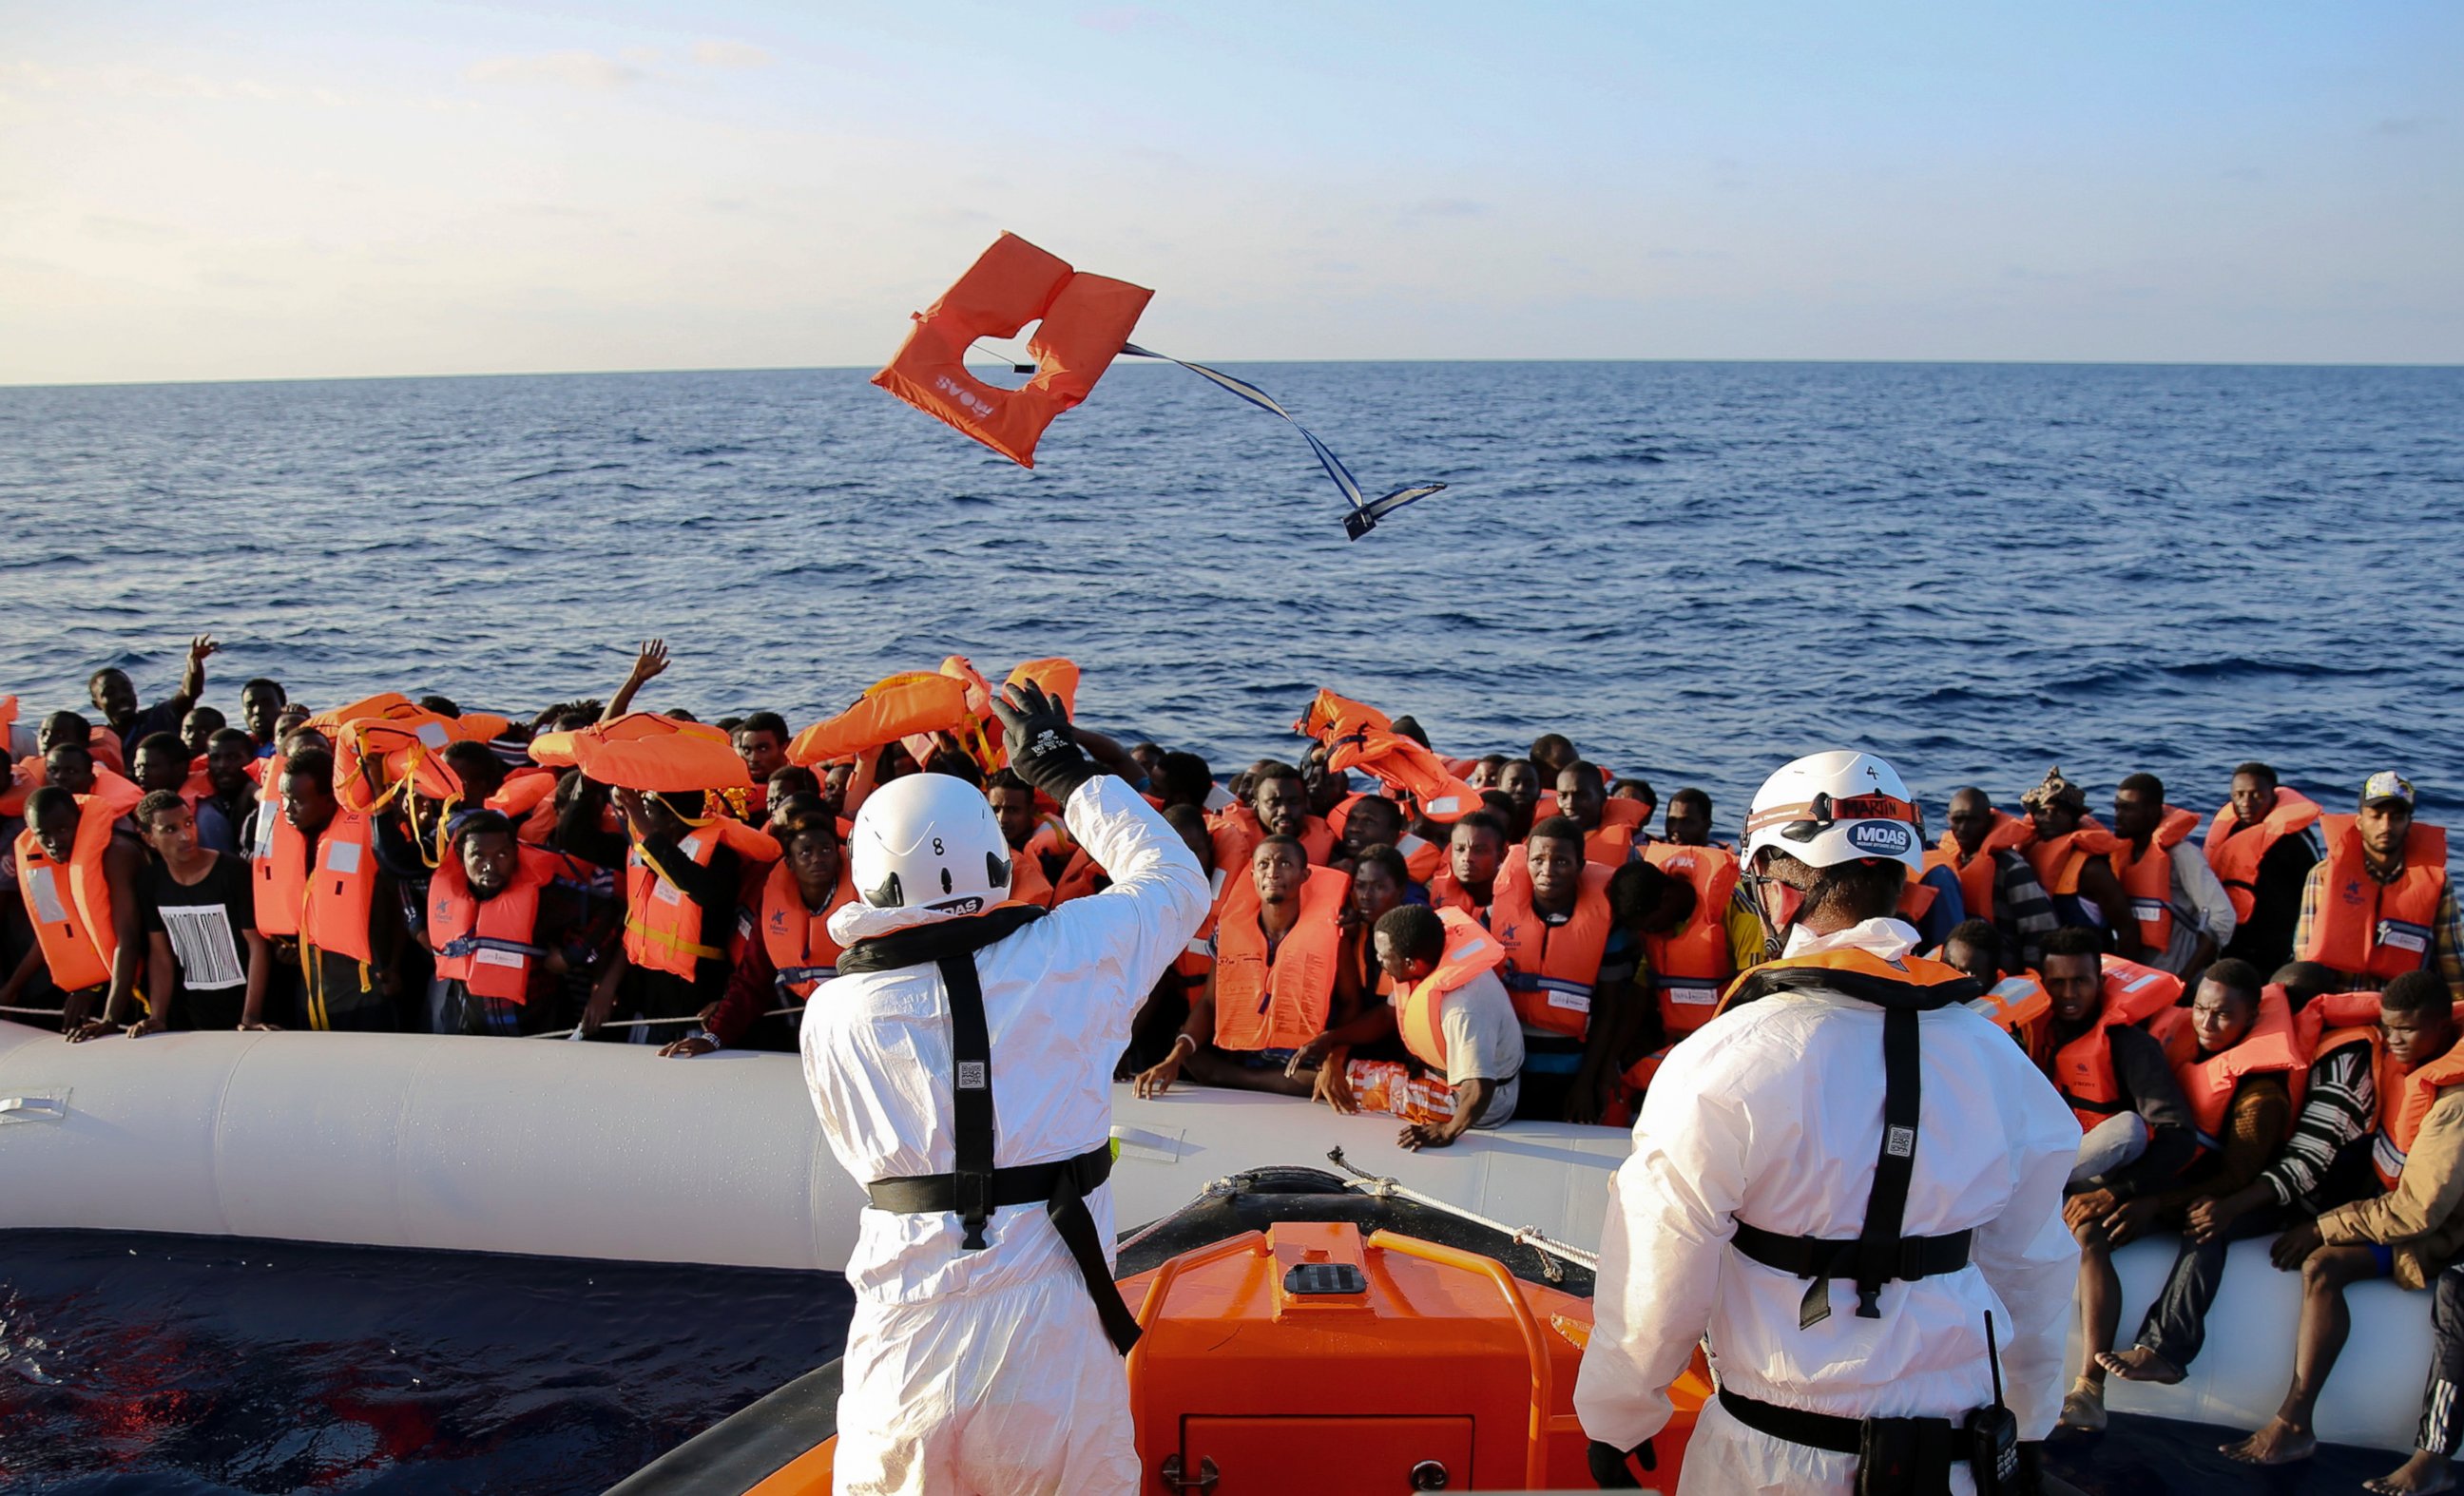 PHOTO: Safety jackets are thrown to migrants on a rubber dinghy from the vessel Responder, run by the Malta-based NGO Migrant Offshore Aid Station (MOAS) and the Italian Red Cross.